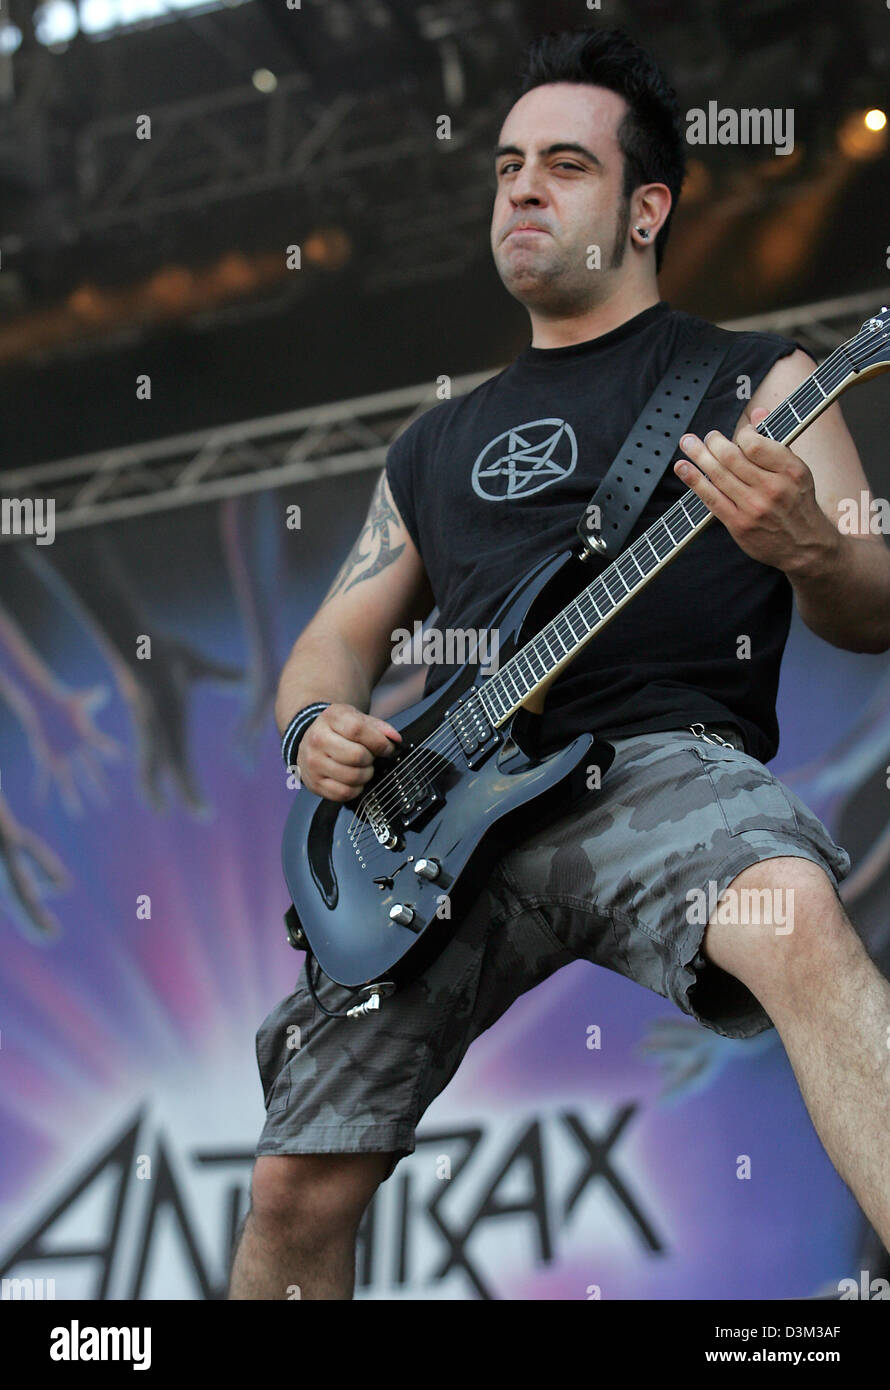 dpa files) - Rob Caggiano, guitarist of the US heavy metal band Anthrax,  plays his guitar in stage during a concert of the band at the open-air  music festival in Wacken, Germany,